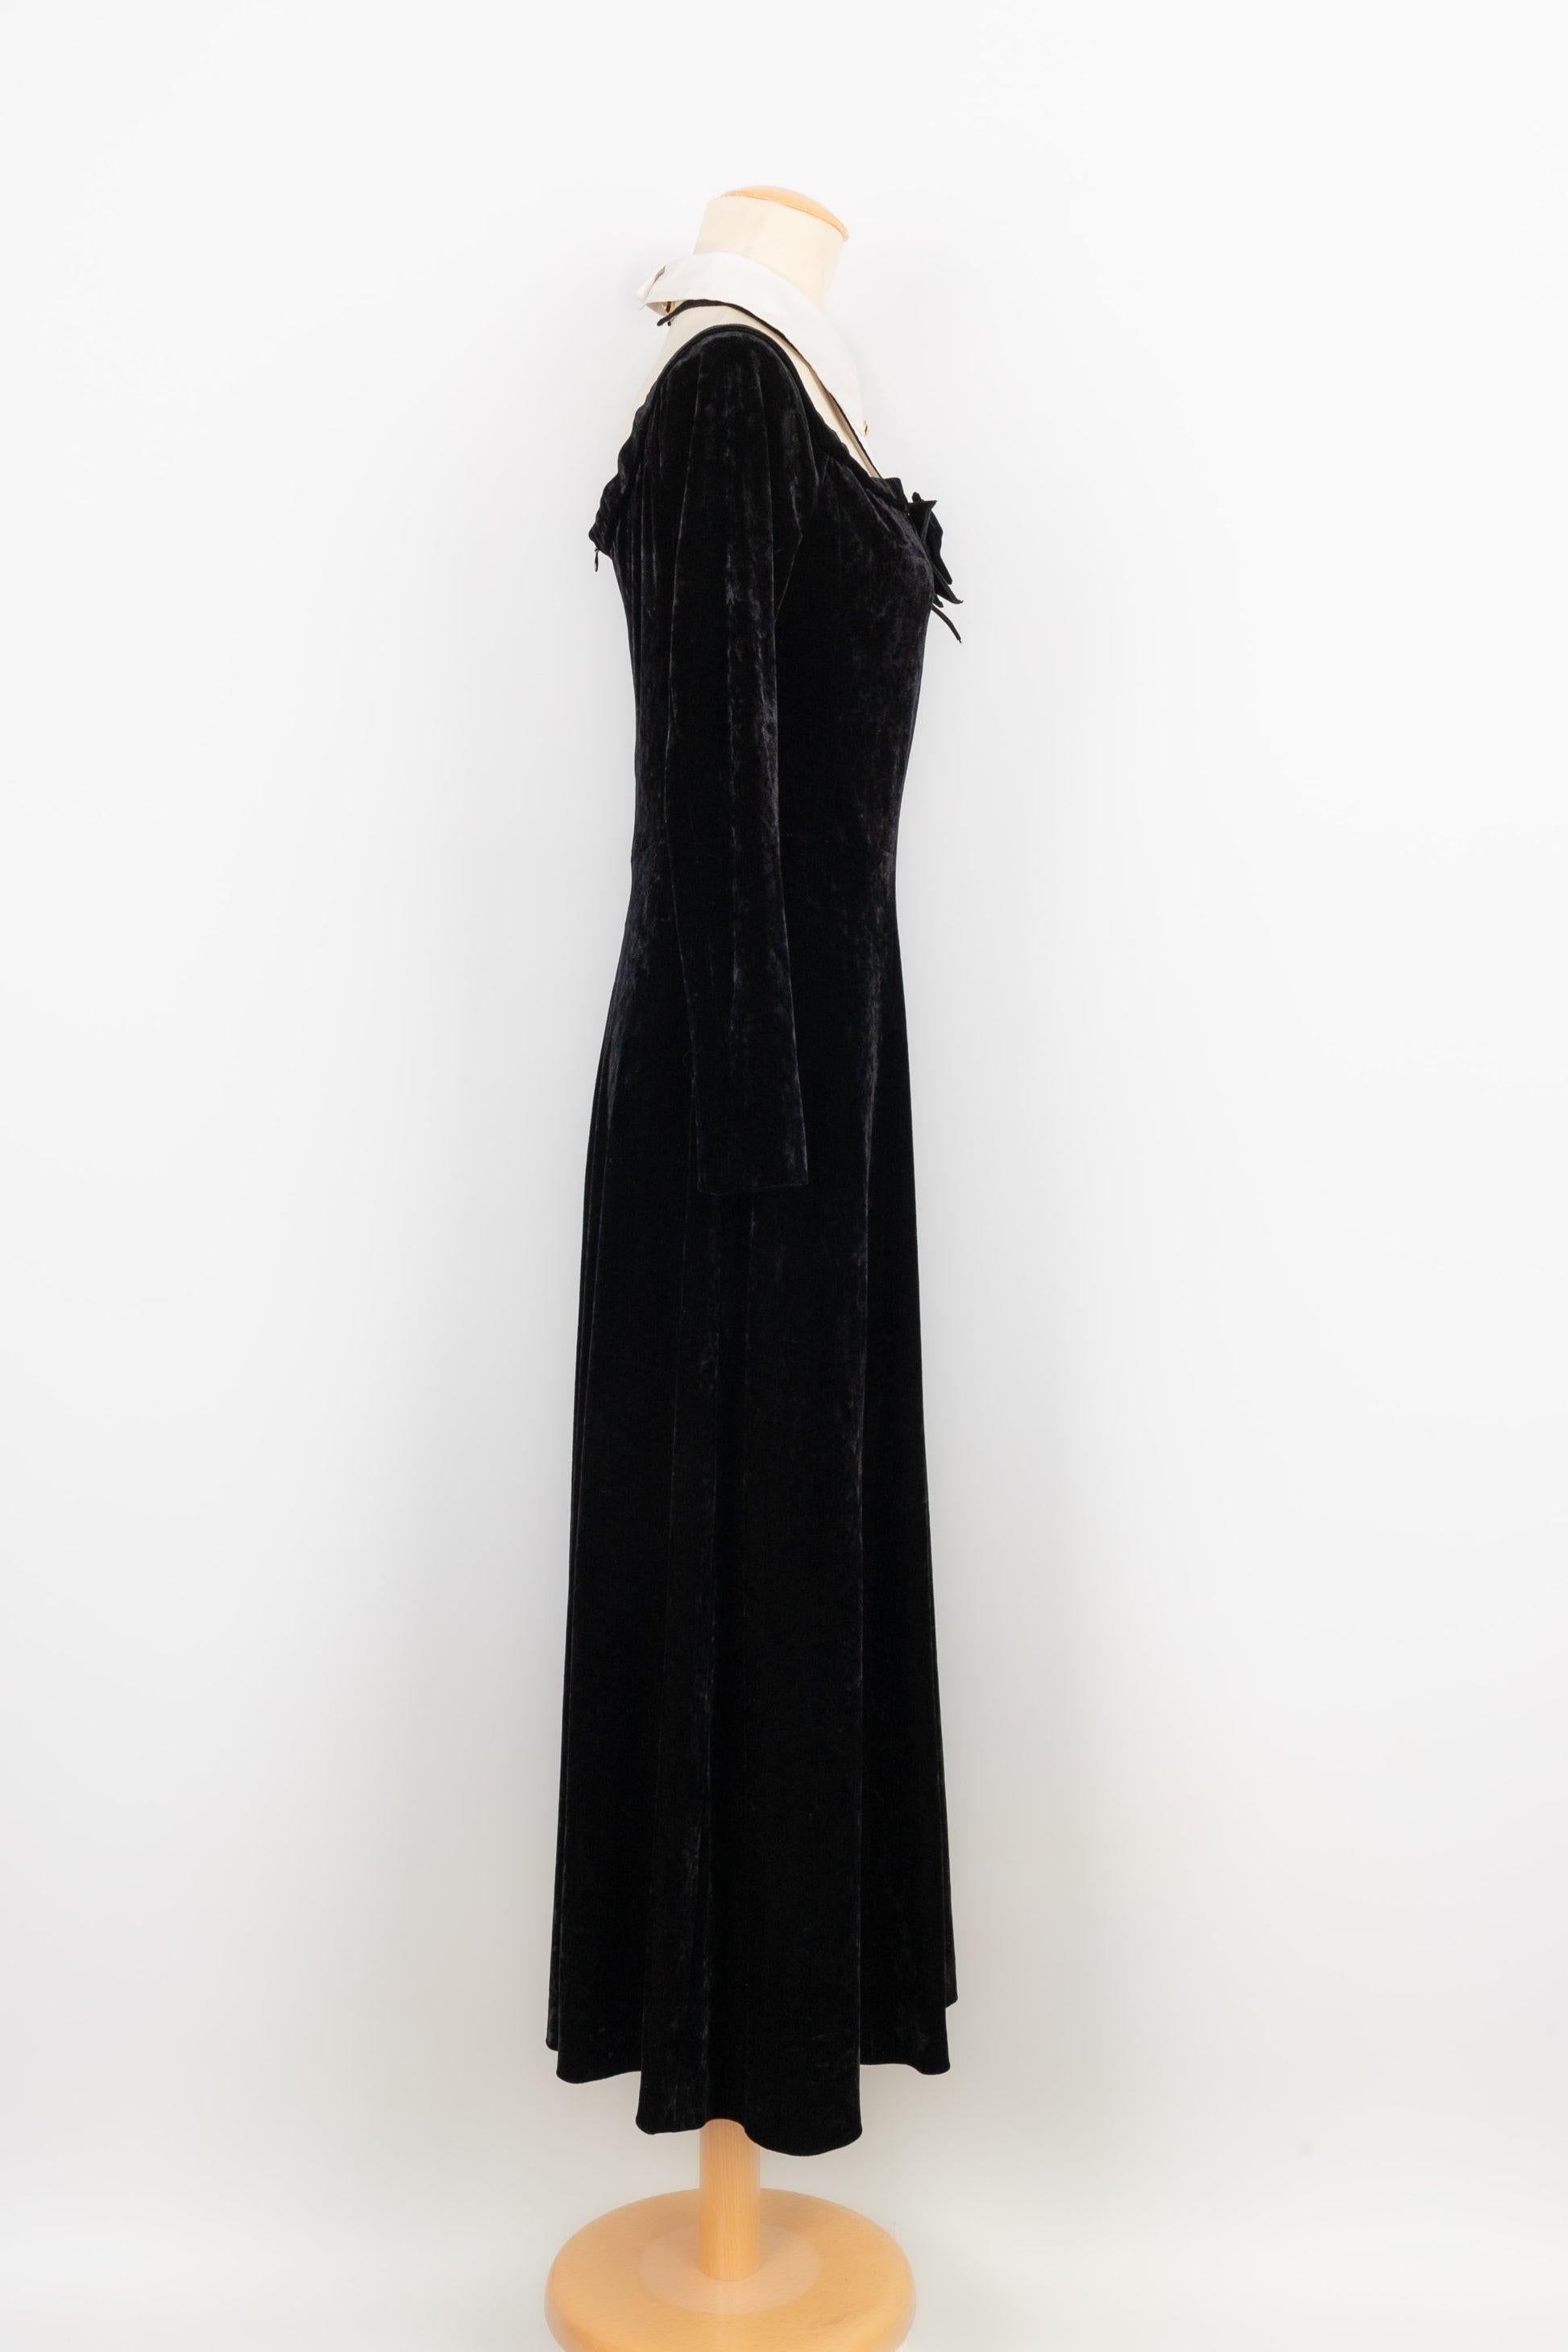 Chanel - (Made in France) Black velvet dress with a white collar and ornamented with golden metal buttons. Indicated size 42FR. Fall/Winter 1993 Collection.

Additional information:
Condition: Very good condition
Dimensions: Chest: 45 cm - Waist: 36